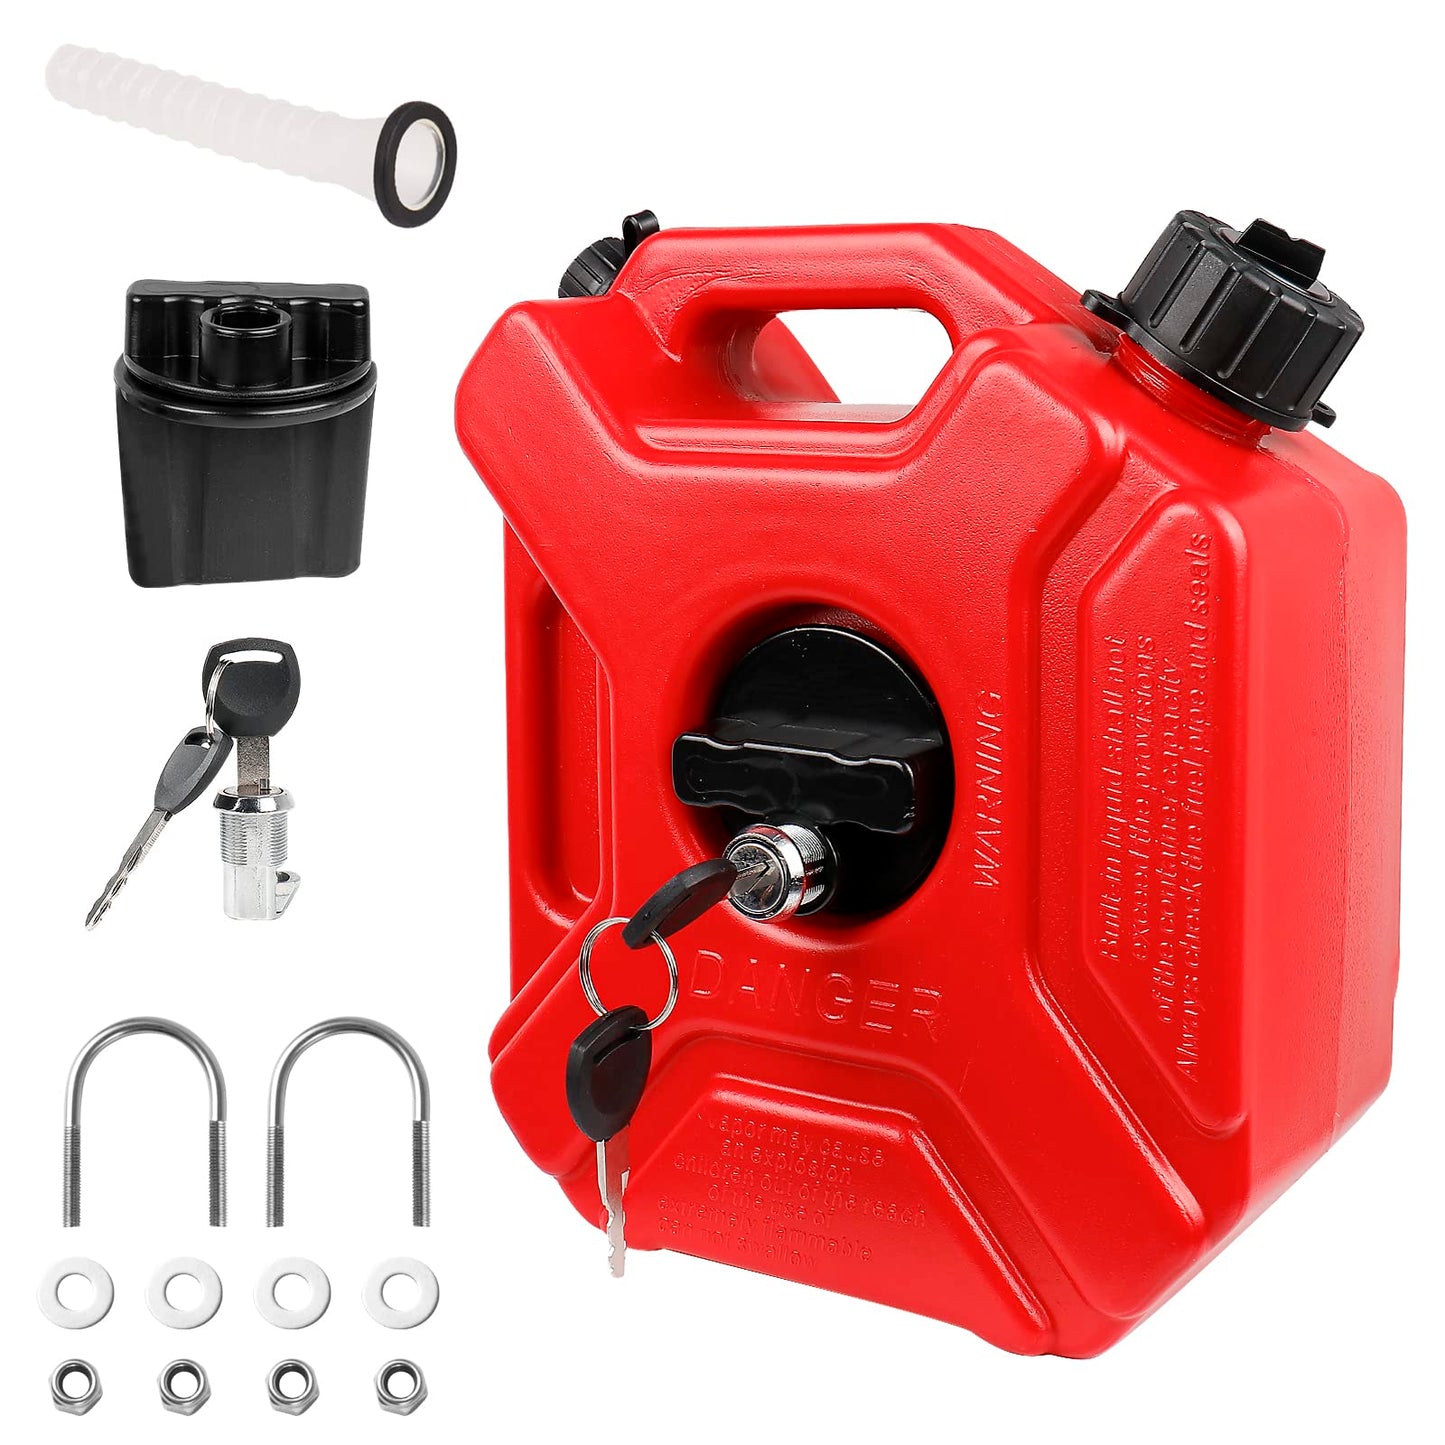 0.8 Gallon Red Gas Can with Lock & Key, 3L Fuel Oil Petrol Storage Cans Emergency Backup Tank with Mounting Bracket for Car Motorcycle UTV SUV ATV Off Road